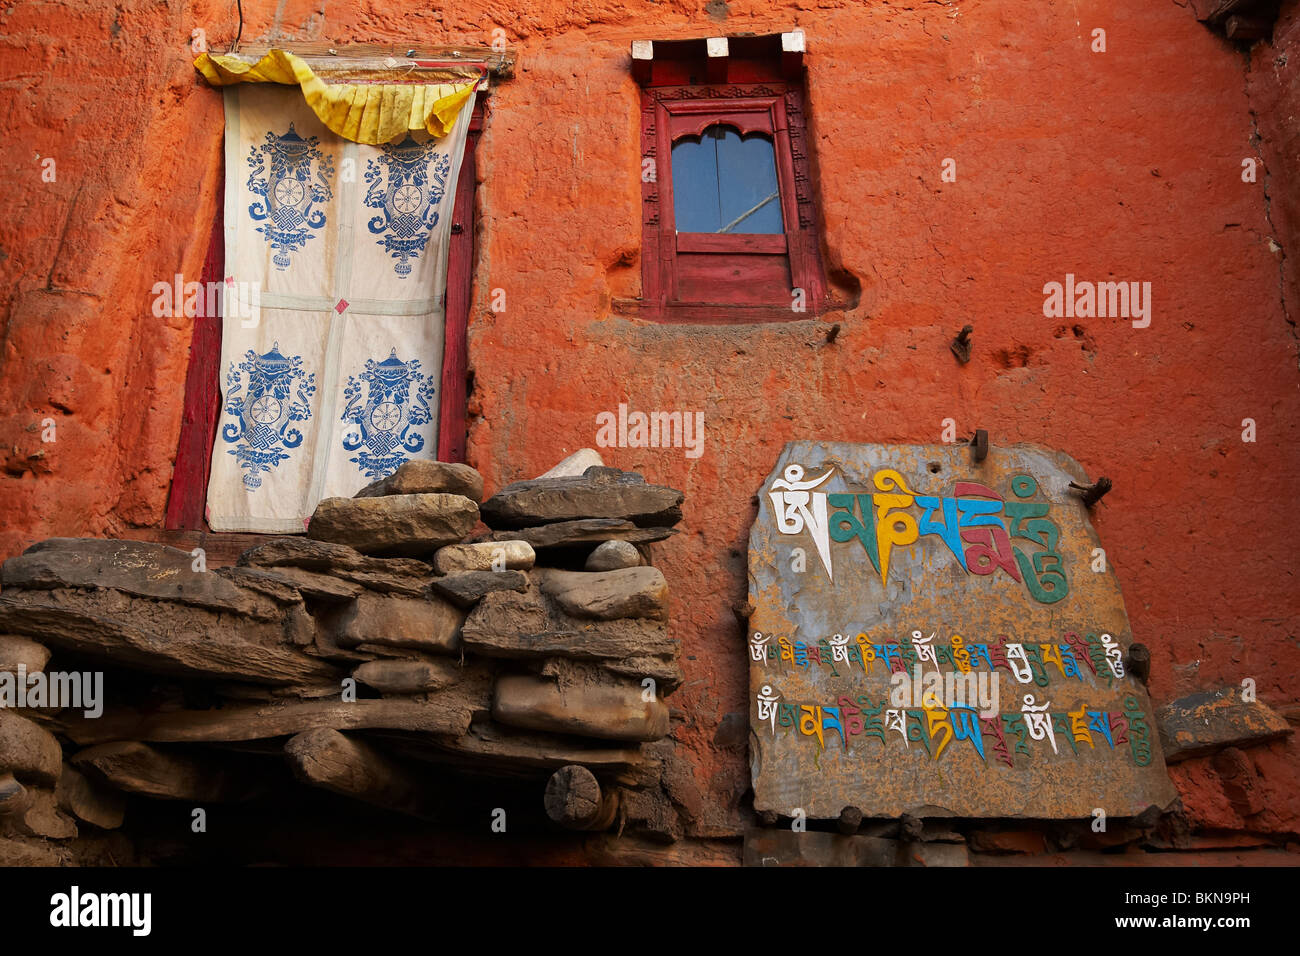 Wall of a home in Kagbeni, Nepal on Saturday October 31, 2009. Stock Photo